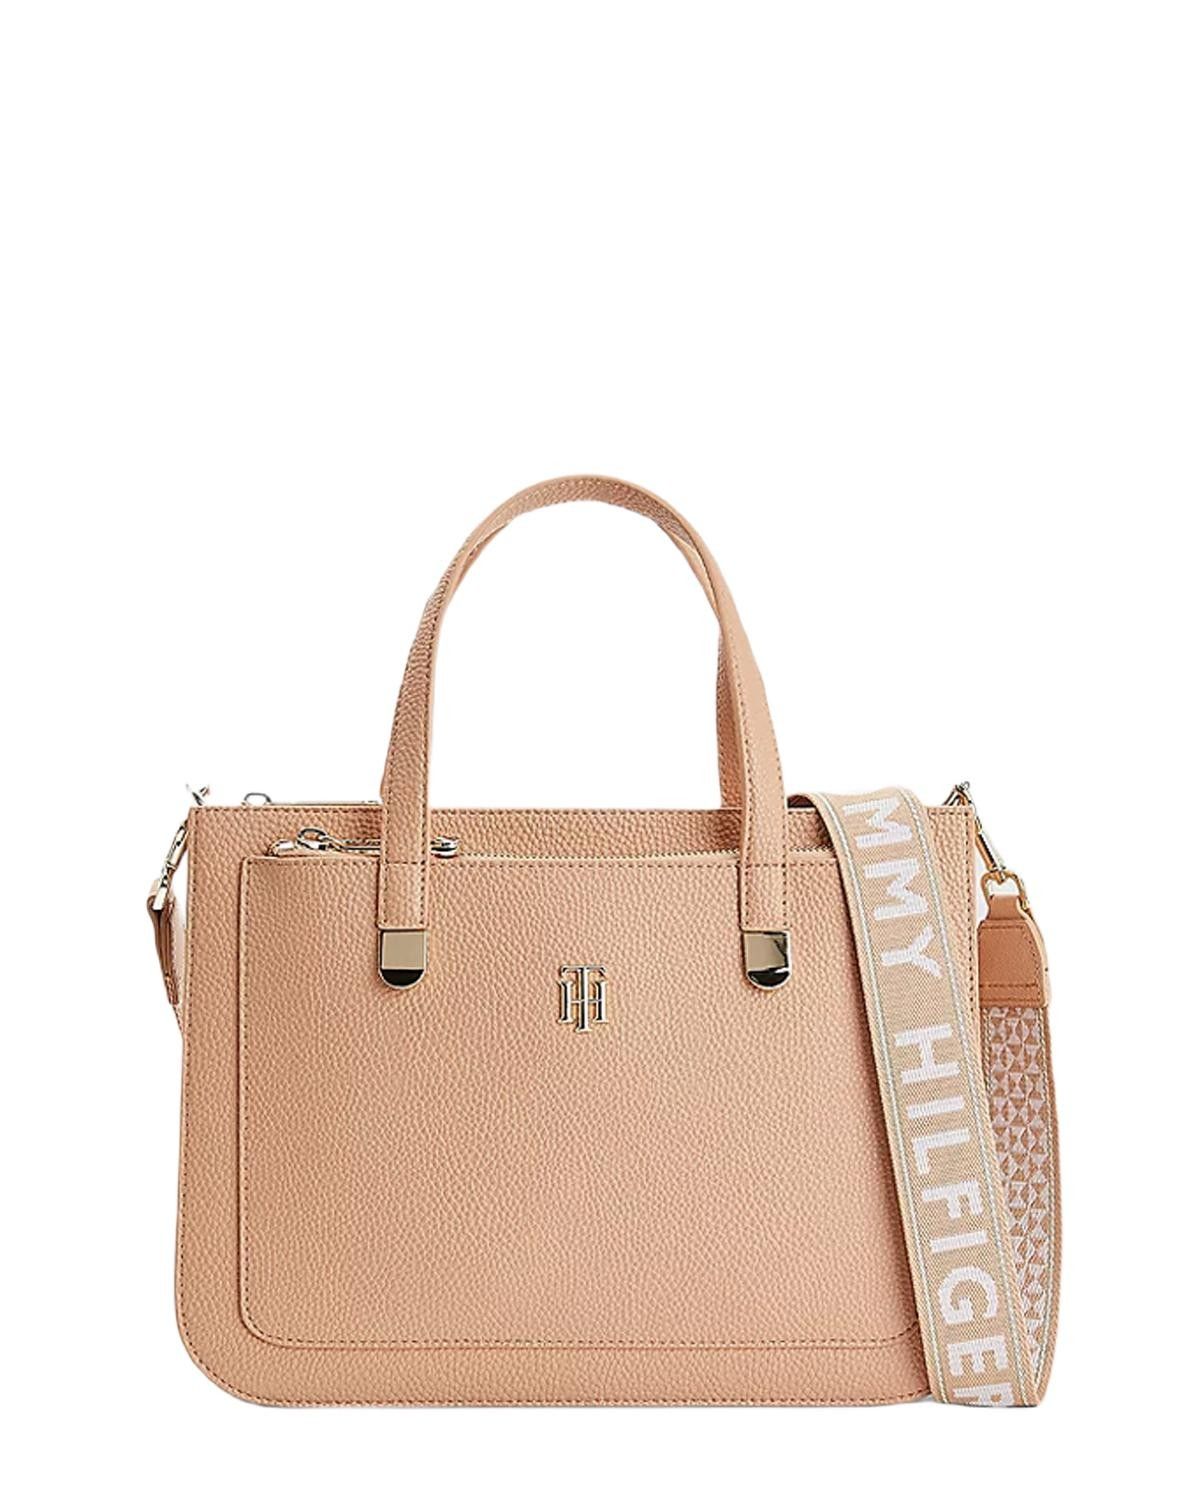 Brand: Tommy Hilfiger Gender: Women Type: Bags Season: Spring/Summer  PRODUCT DETAIL • Color: pink • Pattern: plain • Fastening: with zip • Size (cm): 23x31x9cm  • Details: -handbag -with shoulder strap   COMPOSITION AND MATERIAL • Composition: -100%  polyurethane